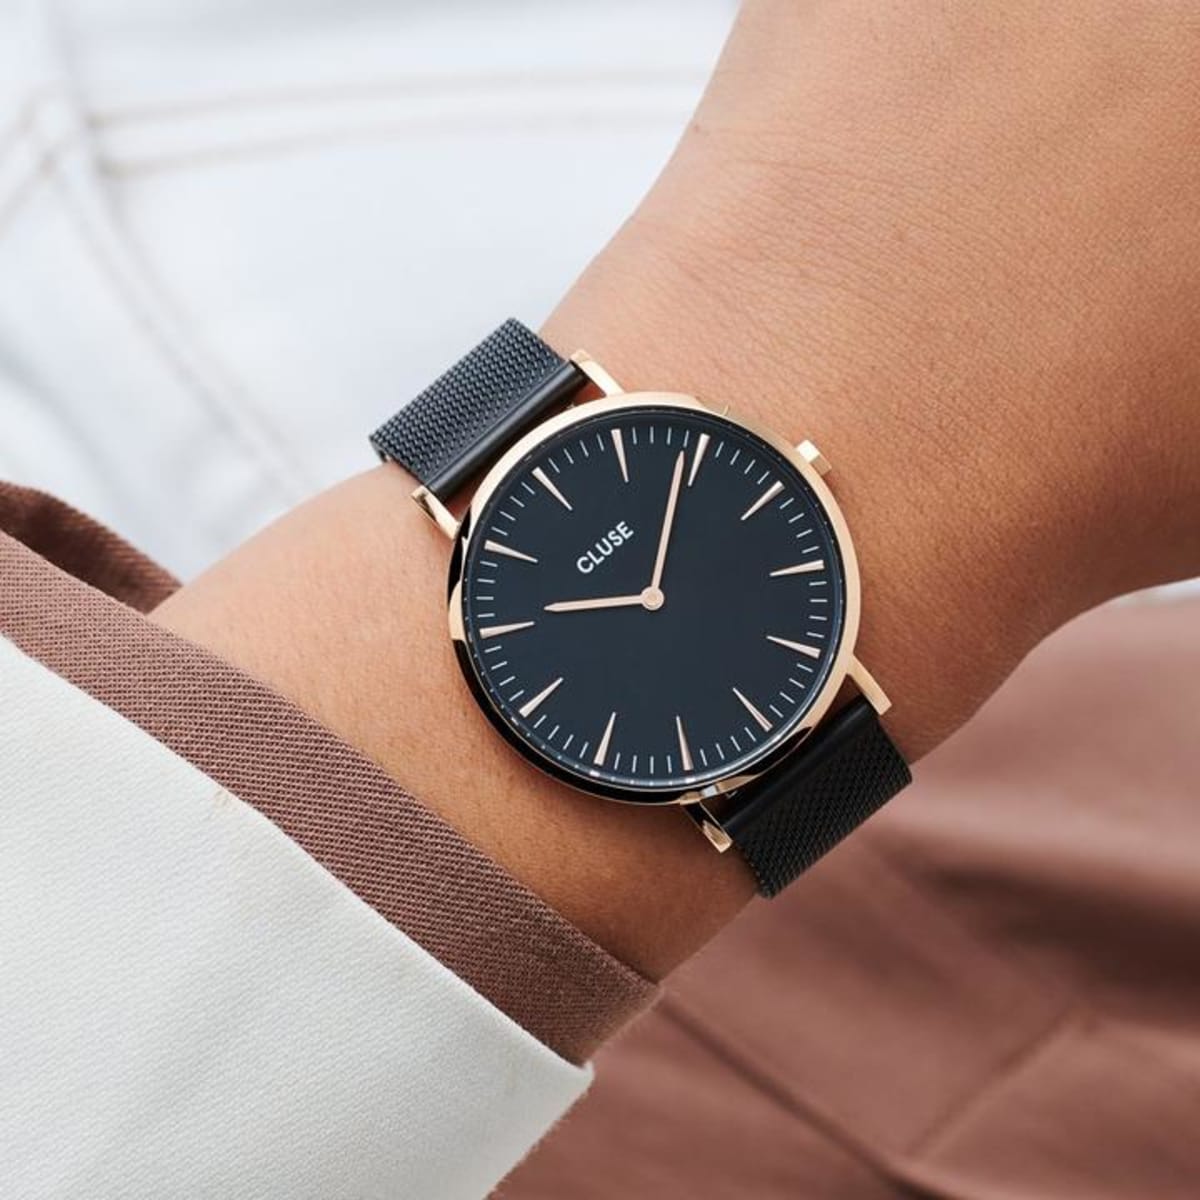 Streamlined clean-edged design. A symphony of symmetry and perfect shapes. Dark geometry and blazing modernity. Presented in a grey leatherette pouch. As with all our watches in the Boho Chic collection, you can easily customise this watch with any Boho Chic or La Roche leather or mesh strap.